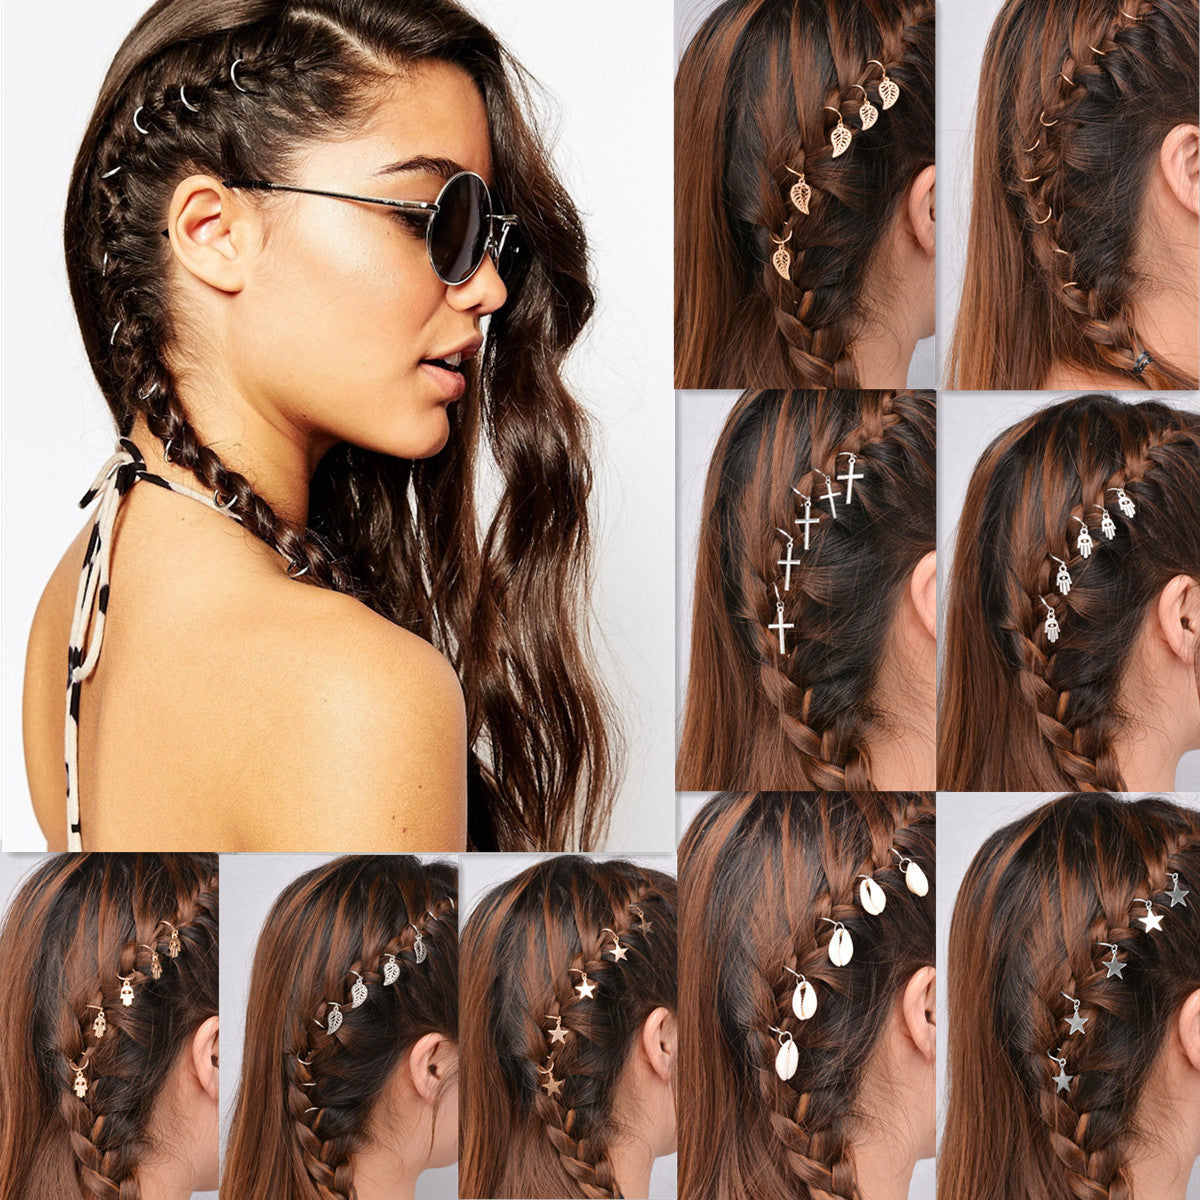 Unique African Stars Plait Leaves 5 Hairpin - Oh Yours Fashion - 1